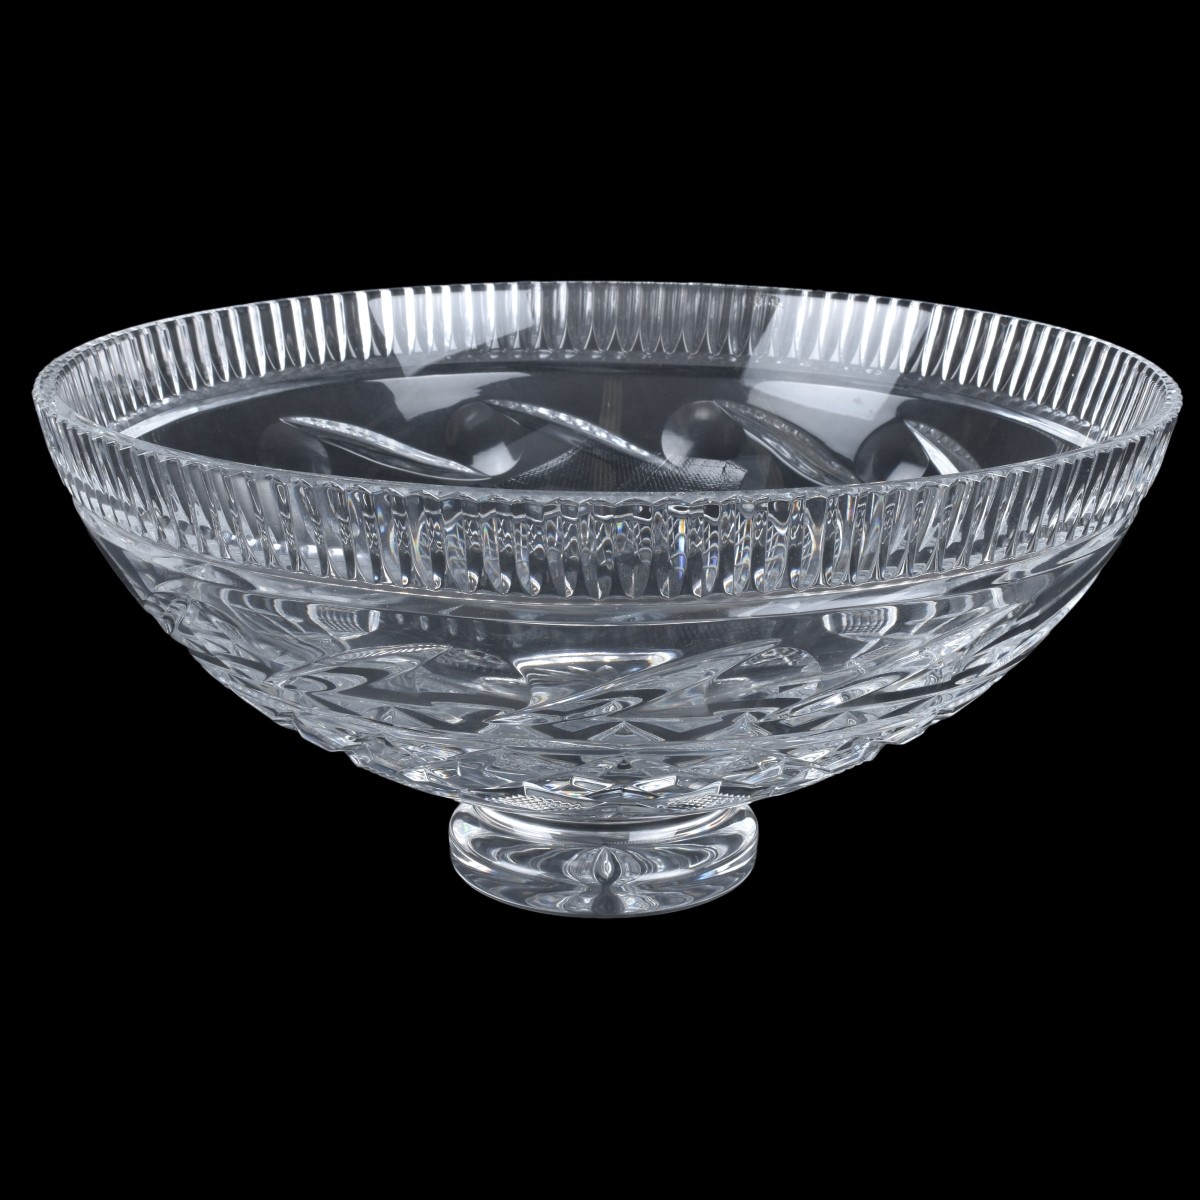 Waterford Cut Crystal Footed Centerpiece Bowl